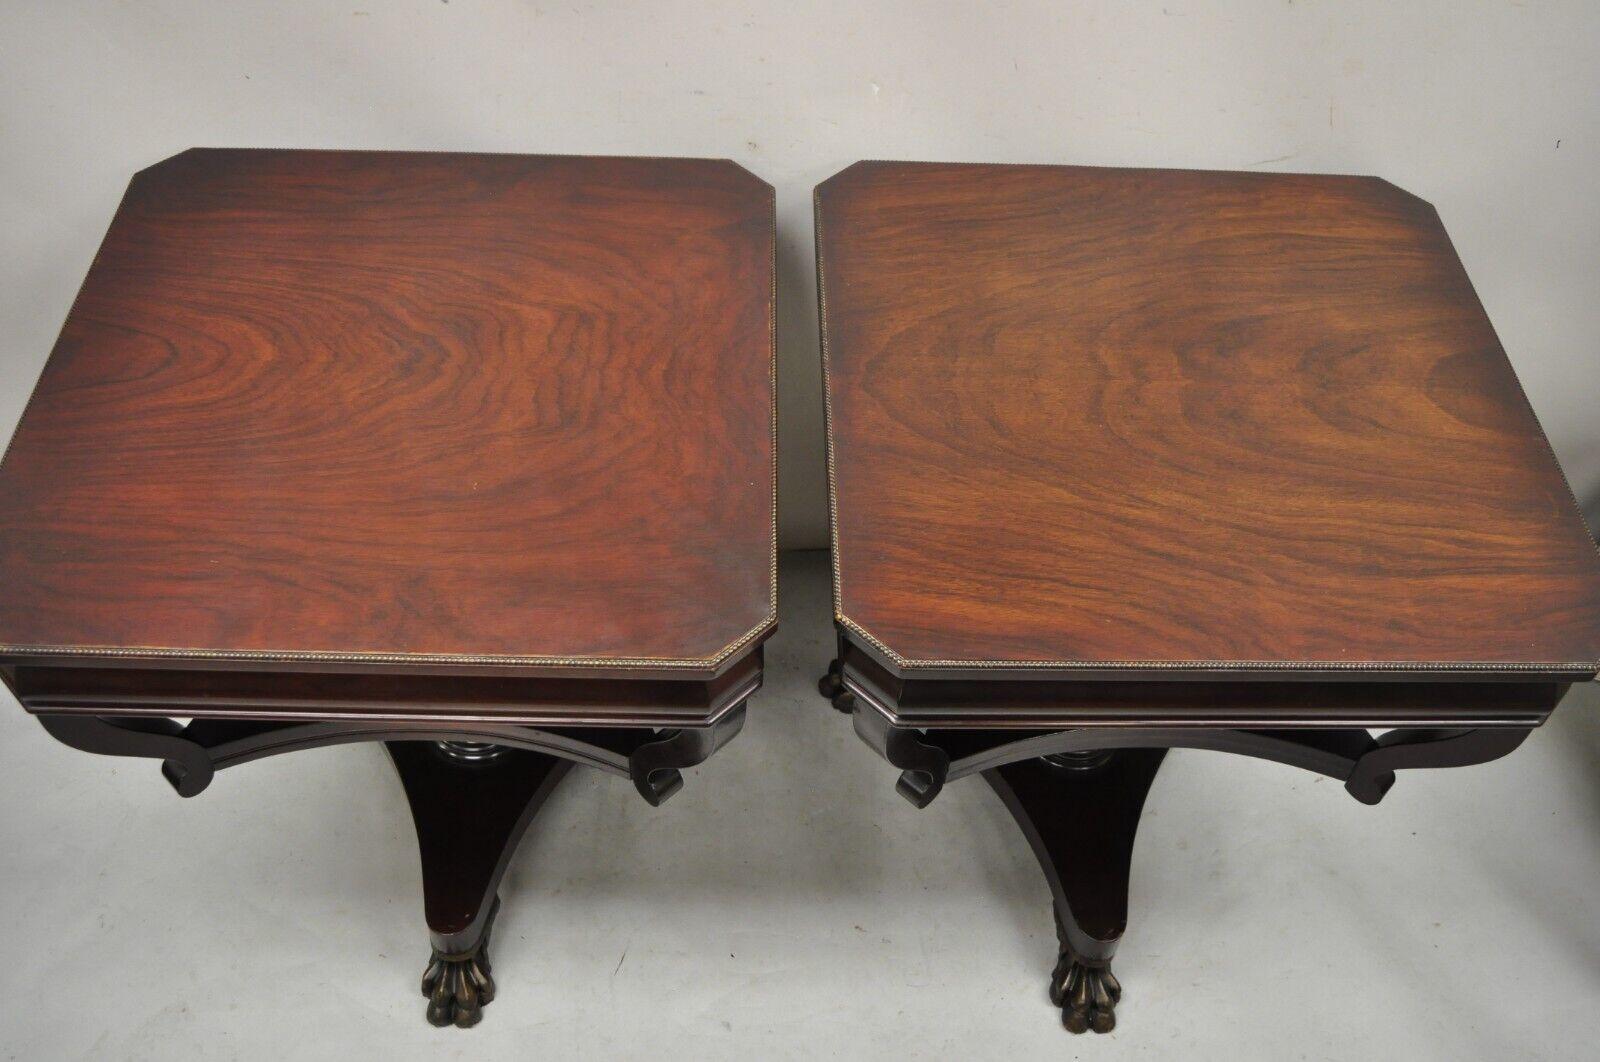 20th Century Vintage French Empire Style Mahogany Paw Feet Side Tables, a Pair For Sale